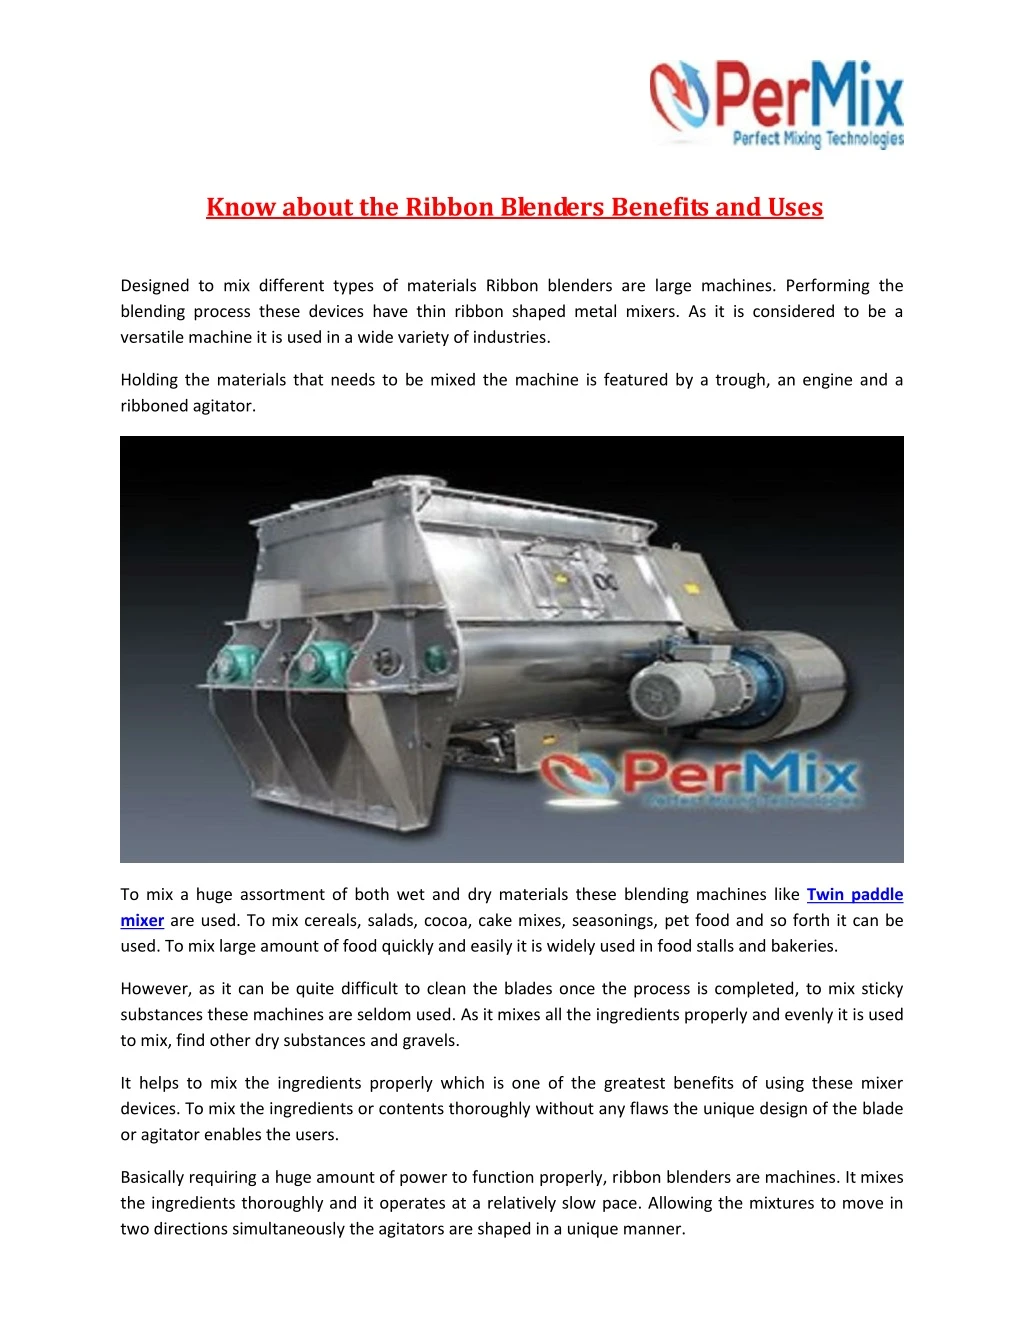 know about the ribbon blenders benefits and uses